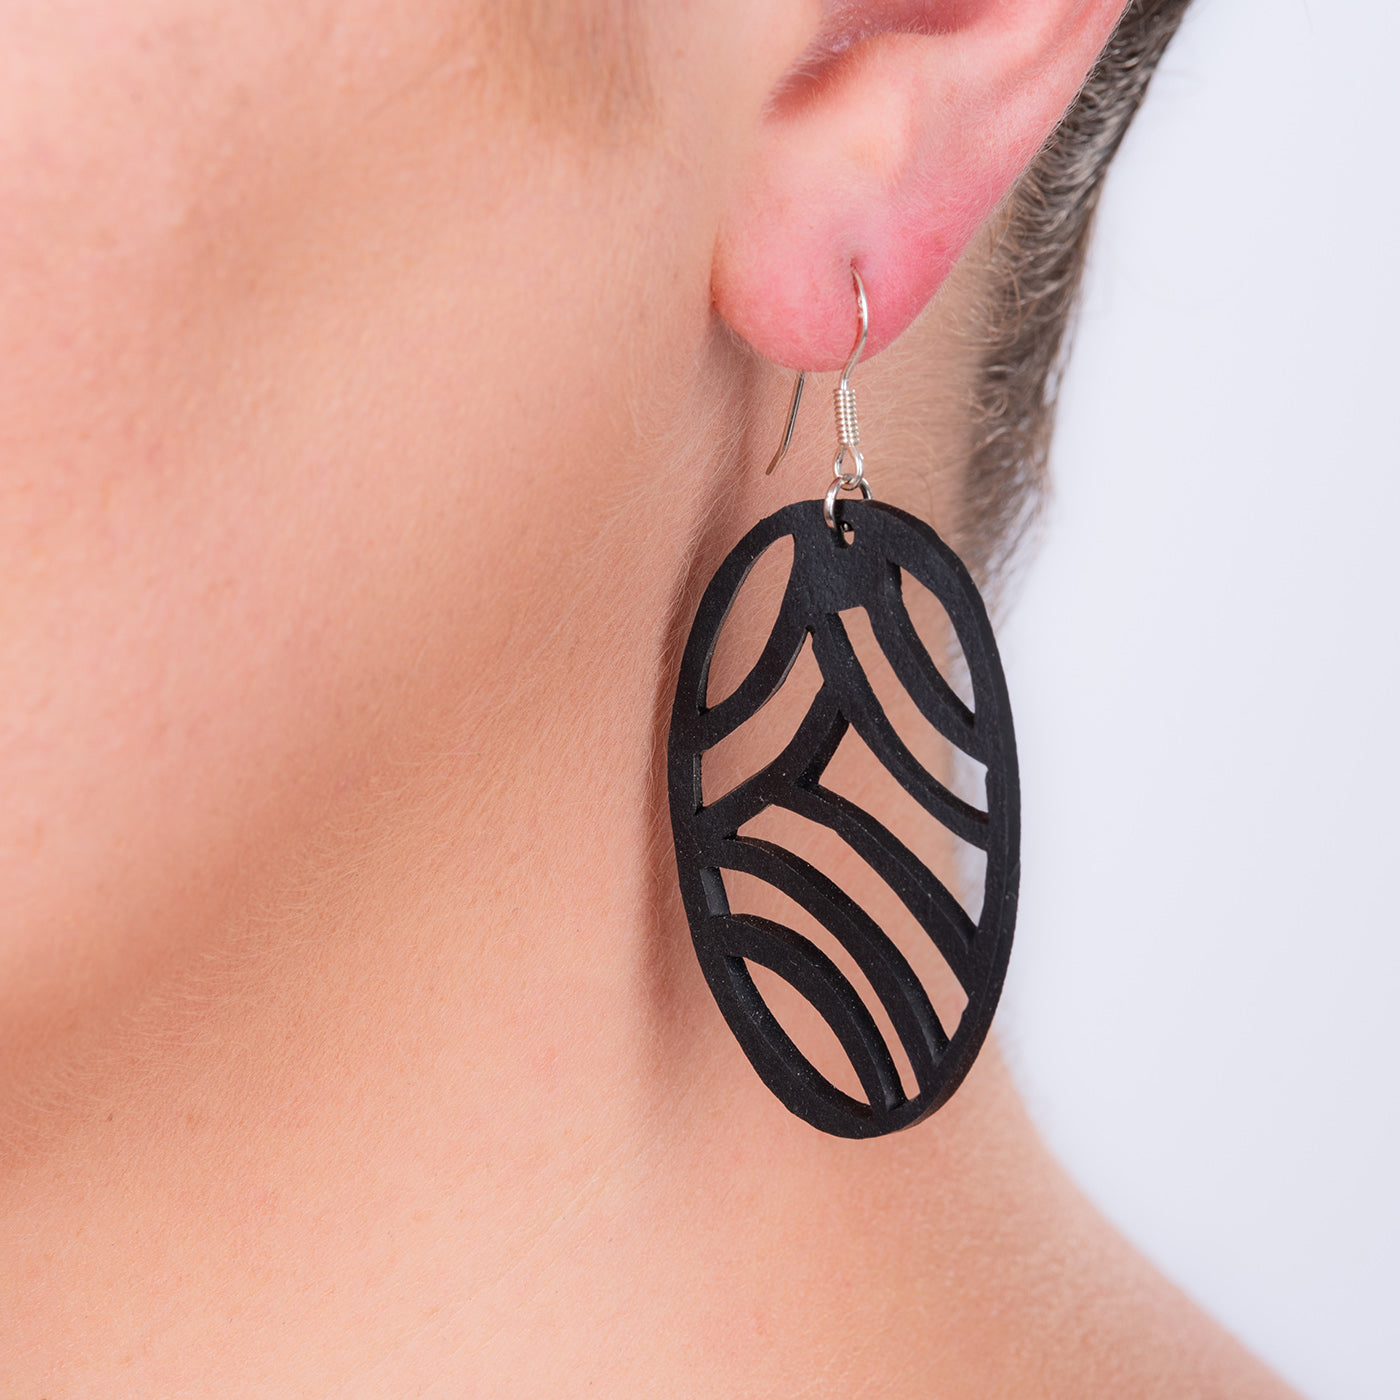 Seraphine (I) Recycled Rubber Earrings by Paguro Upcycle